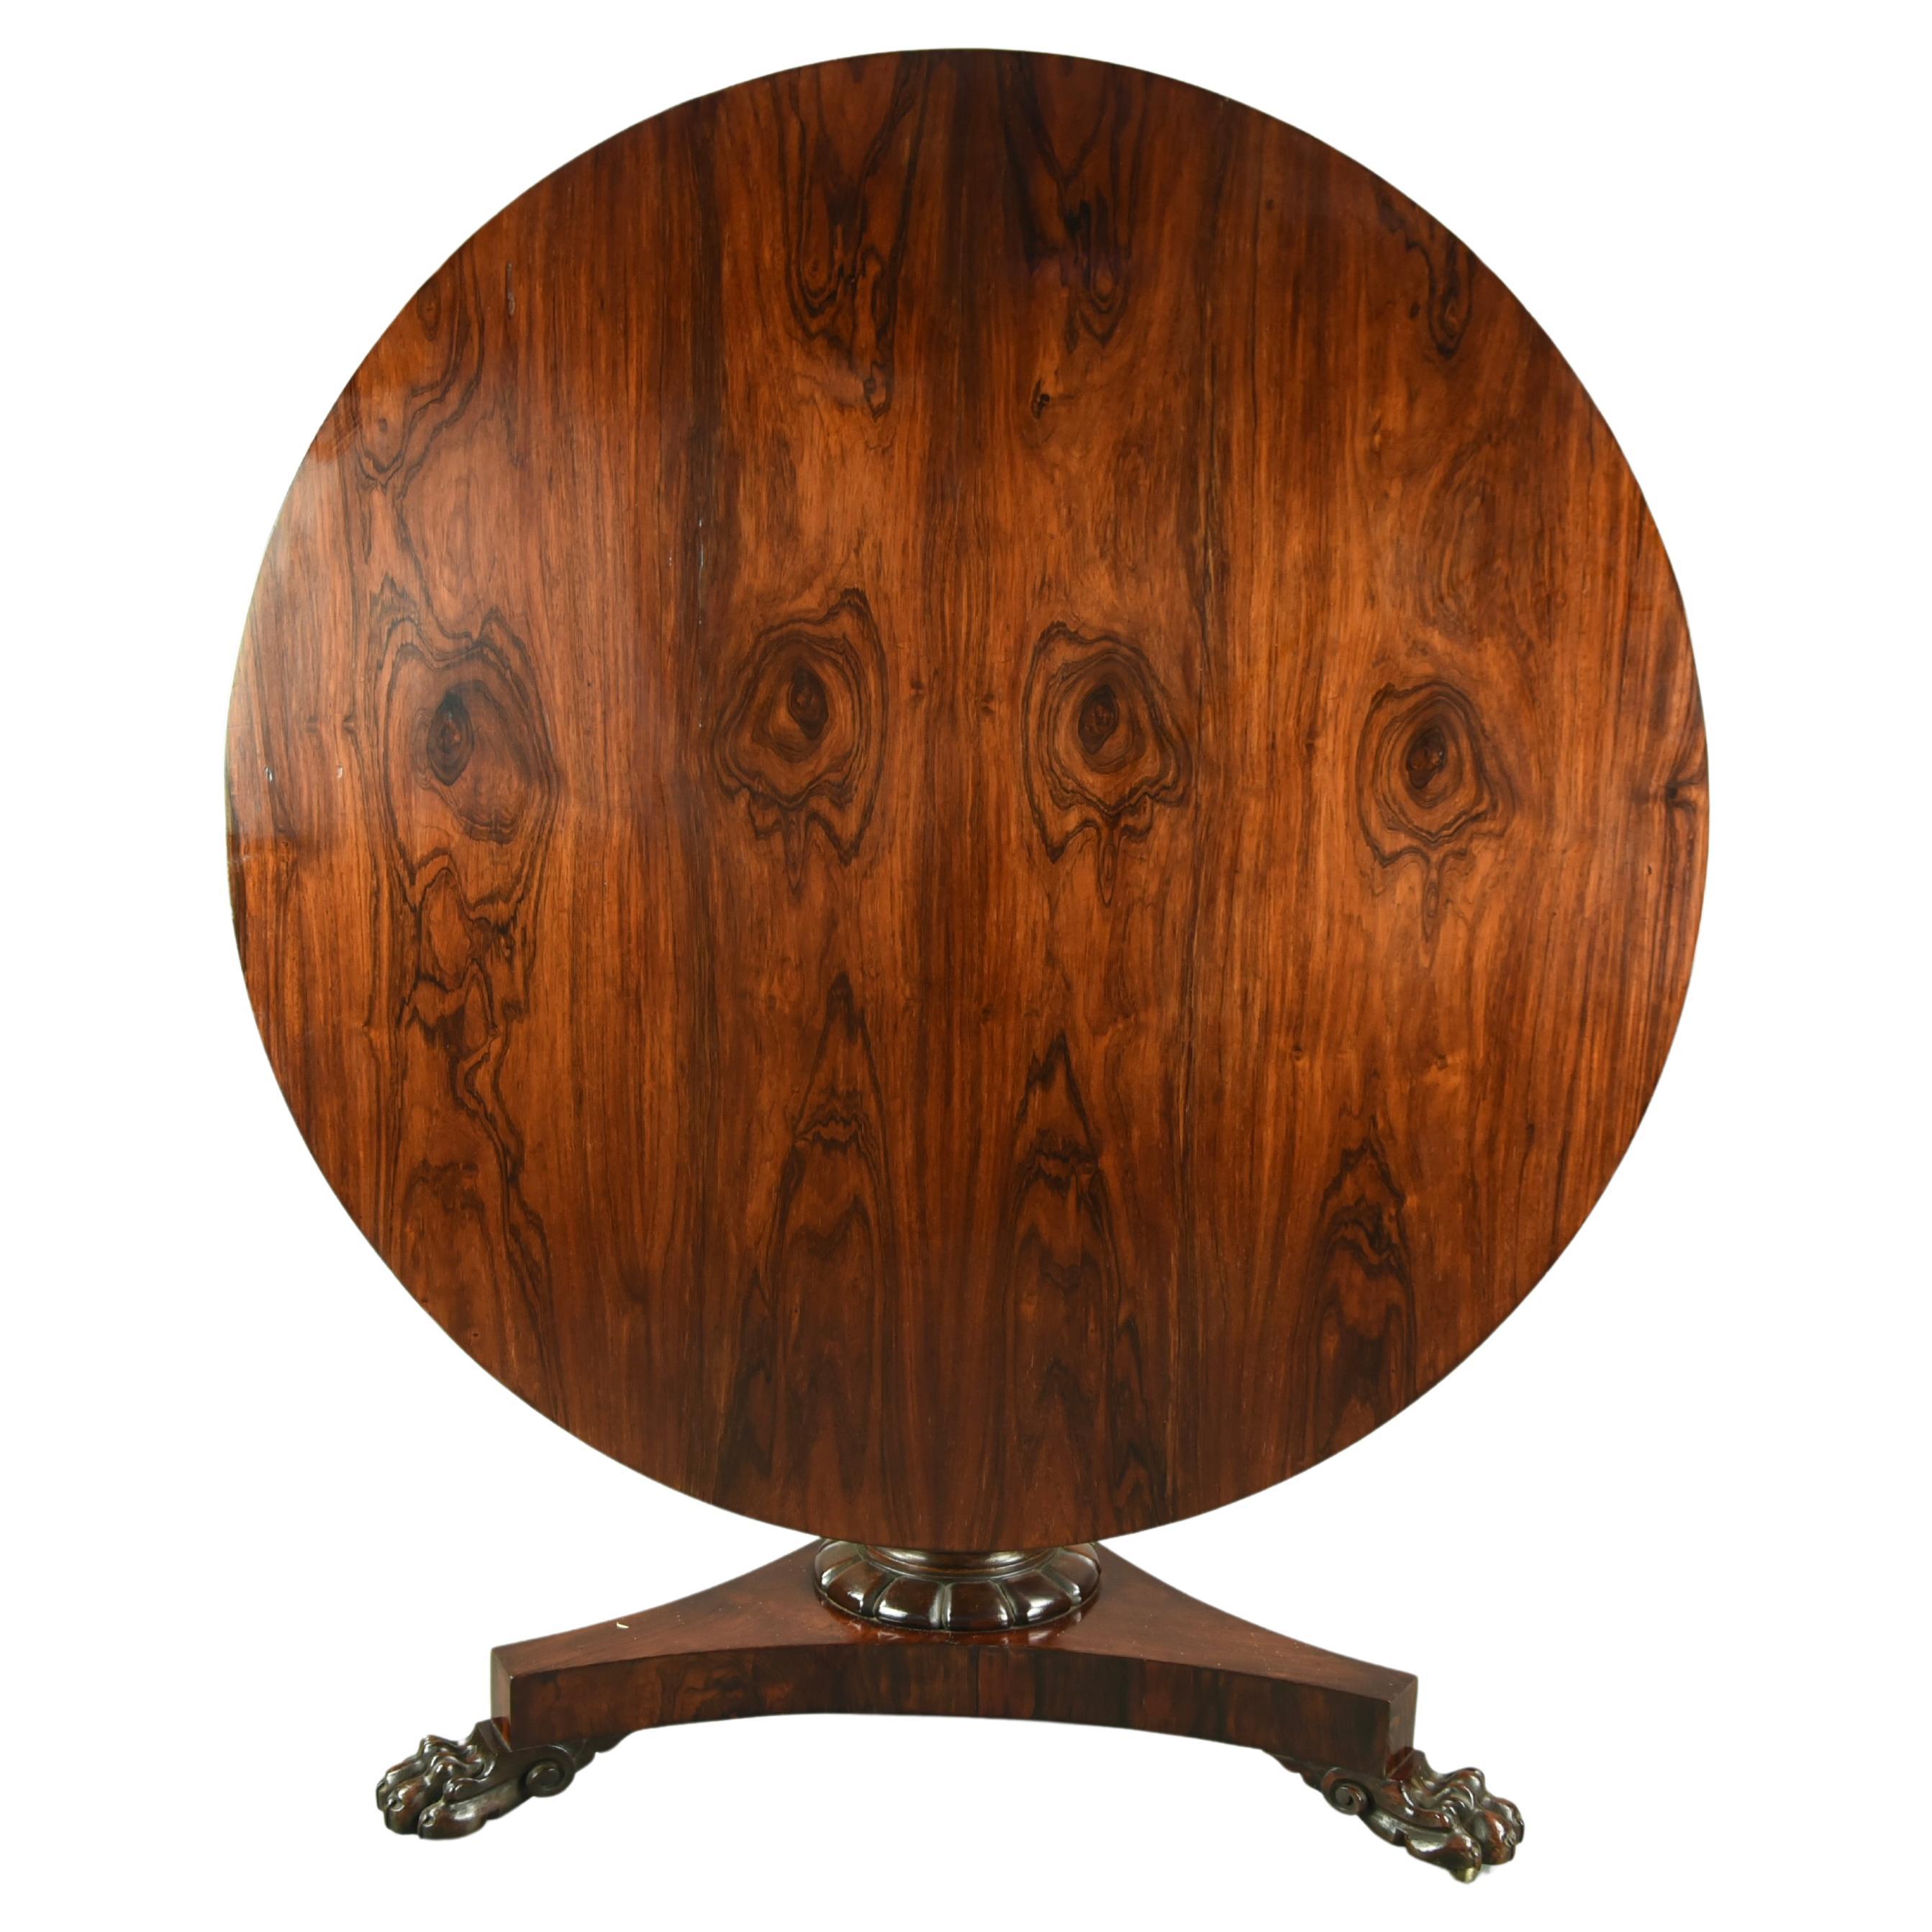 English Antique Regency Rosewood Centre Table